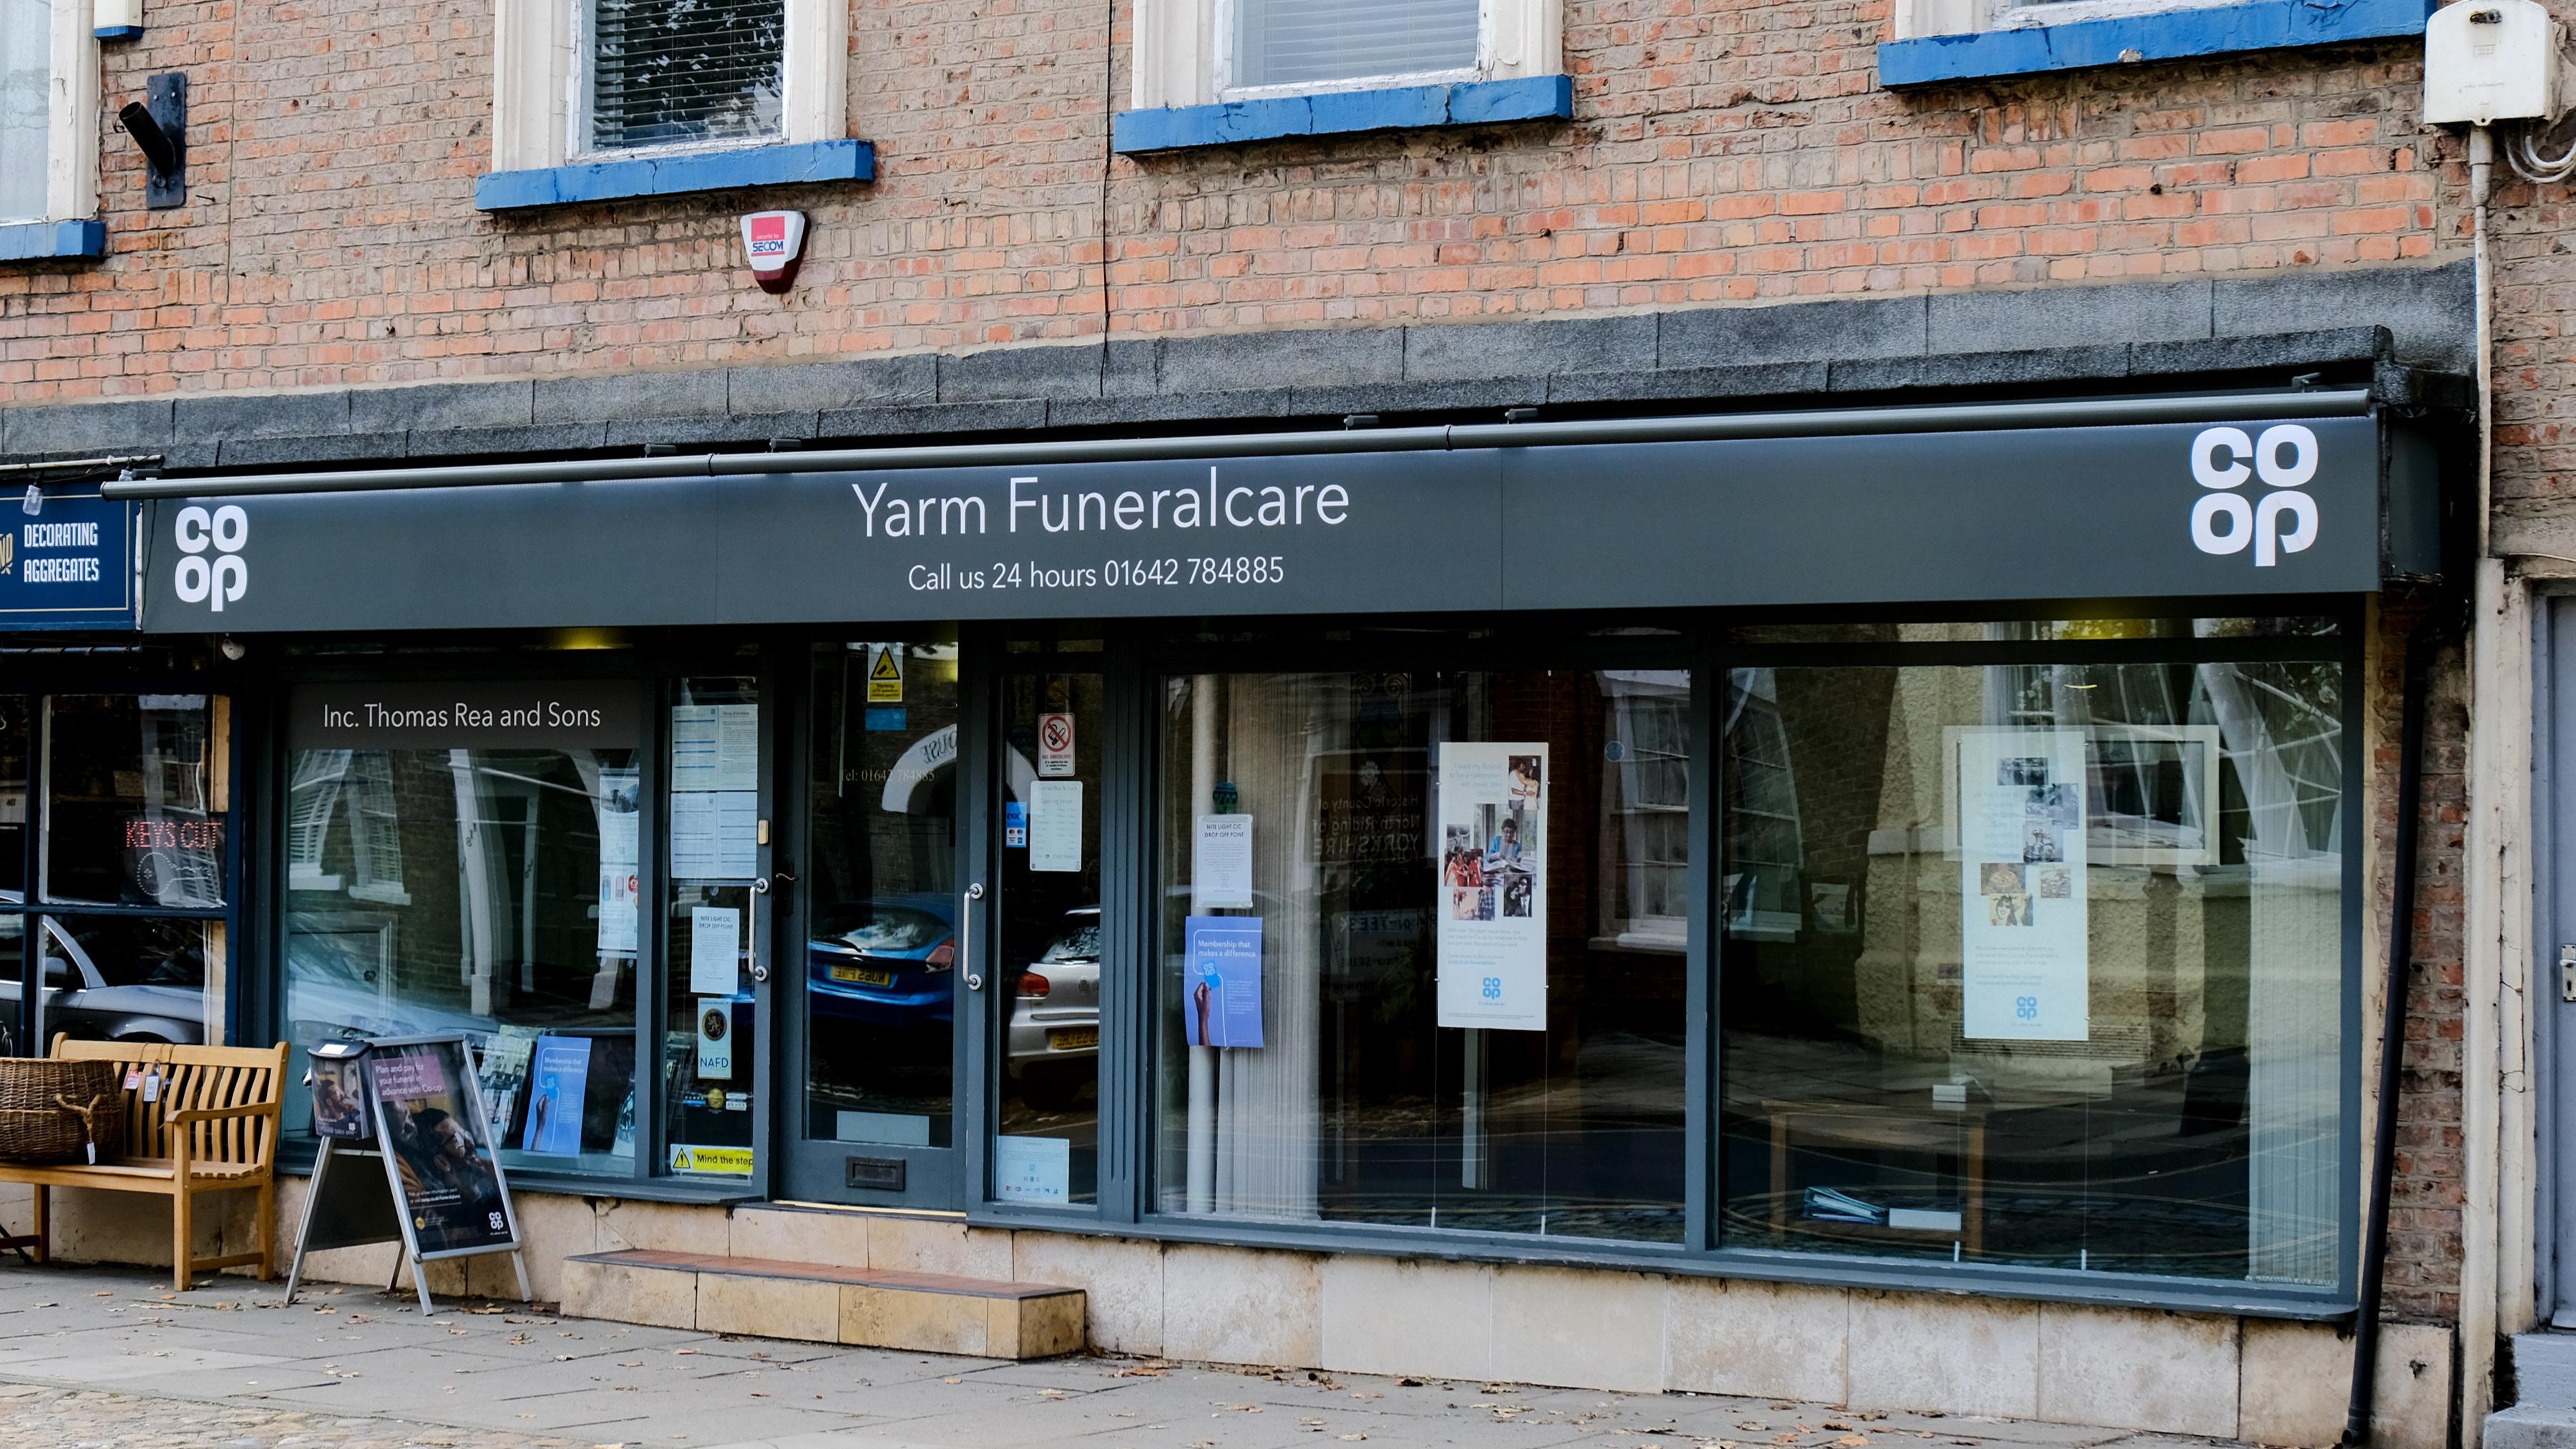 Images Yarm Funeralcare (inc Thomas Rea and Sons)